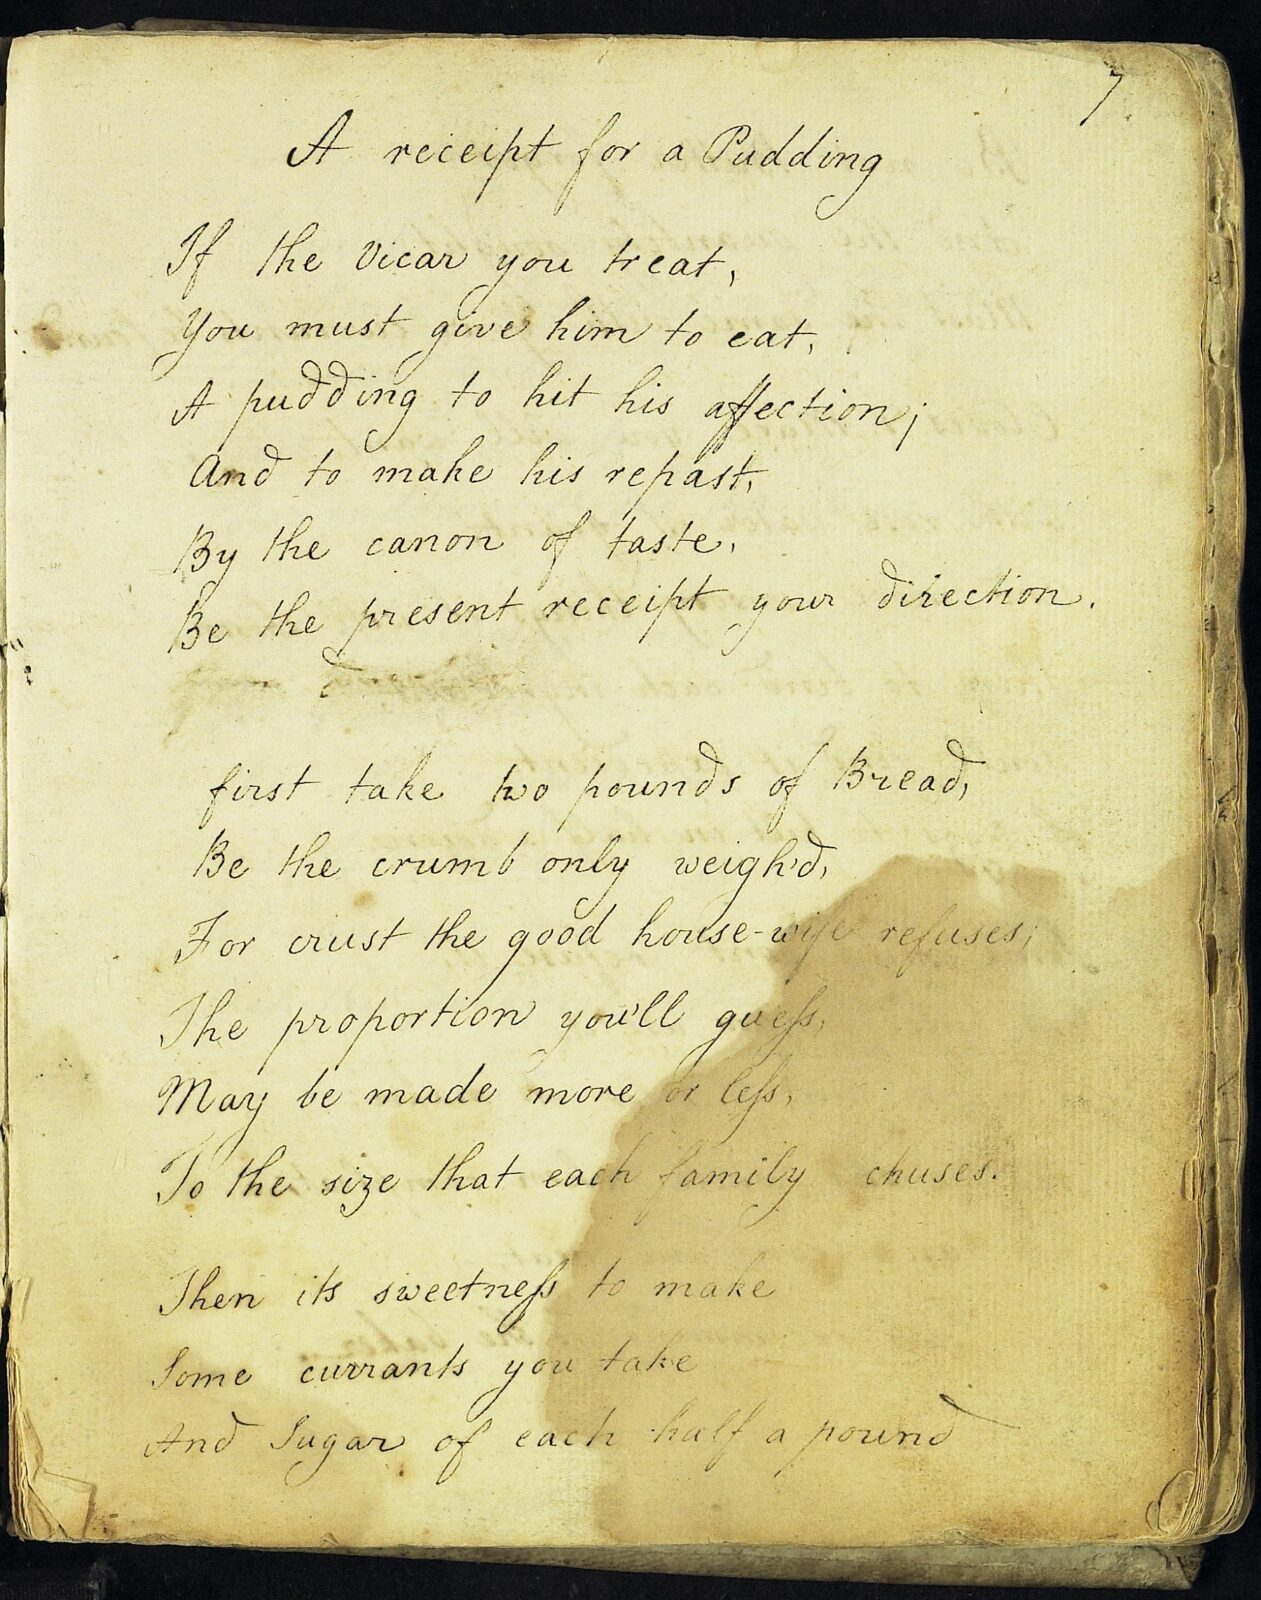 First page of 'A receipt for a Pudding', from Martha Lloyd's handwritten household book